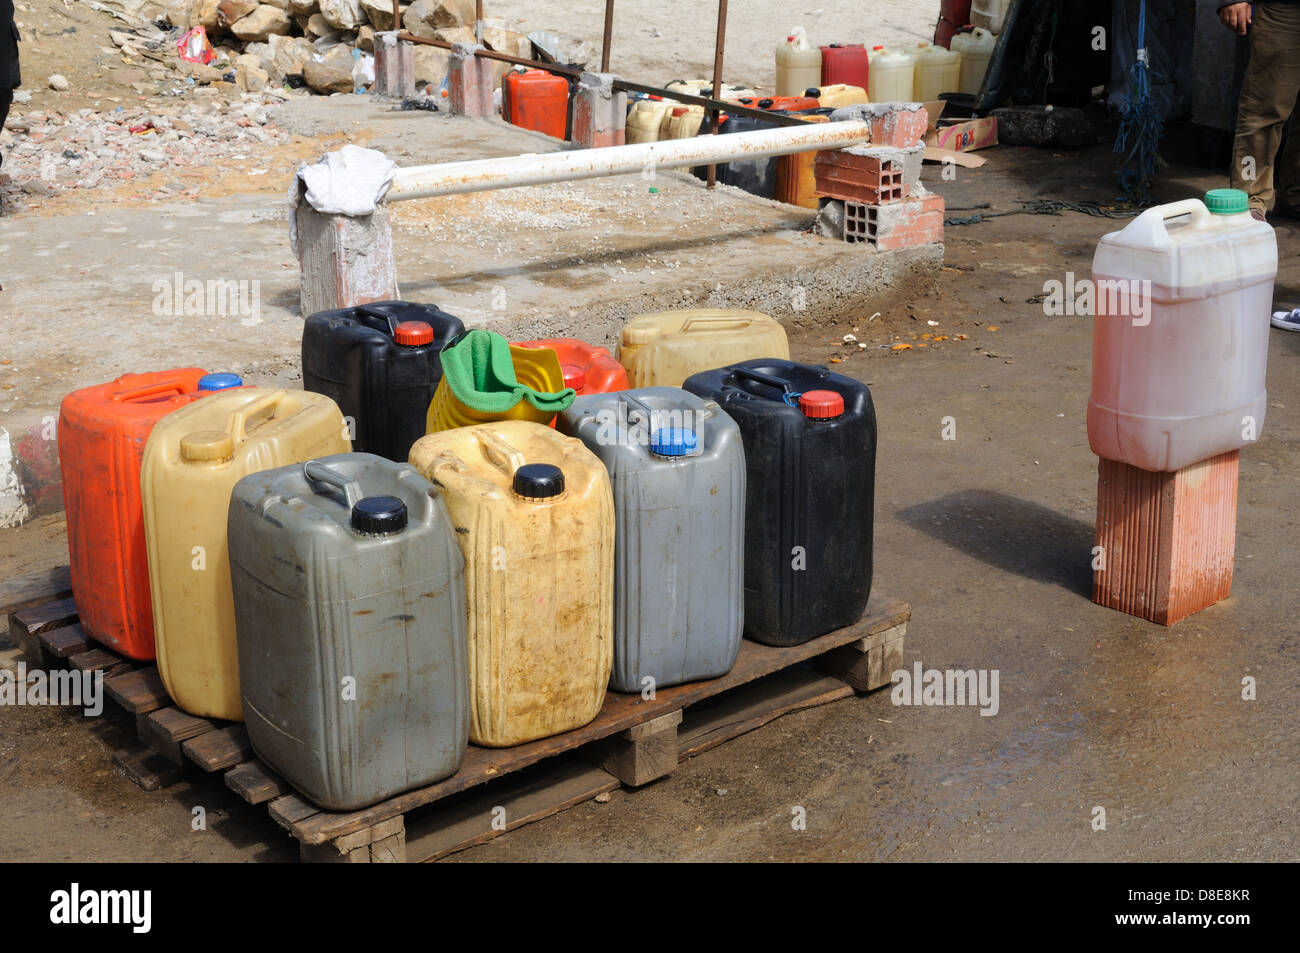 Petrol in plastic drums brought in illegally from Algeria and sold in Ain Draham market Tunisia Stock Photo